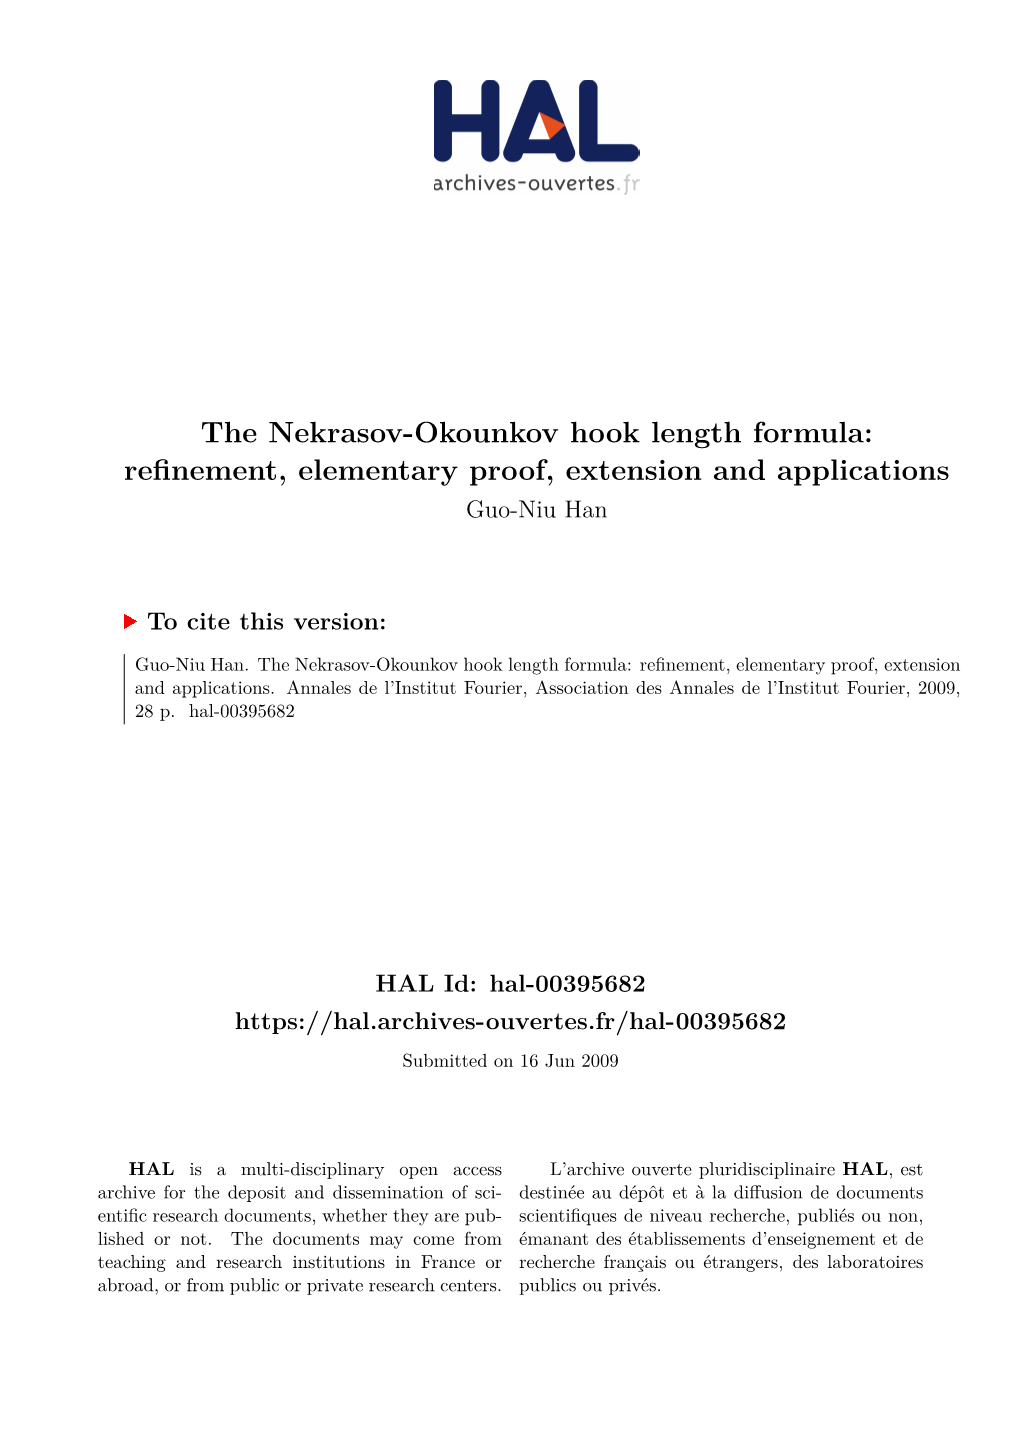 The Nekrasov-Okounkov Hook Length Formula: Refinement, Elementary Proof, Extension and Applications Guo-Niu Han